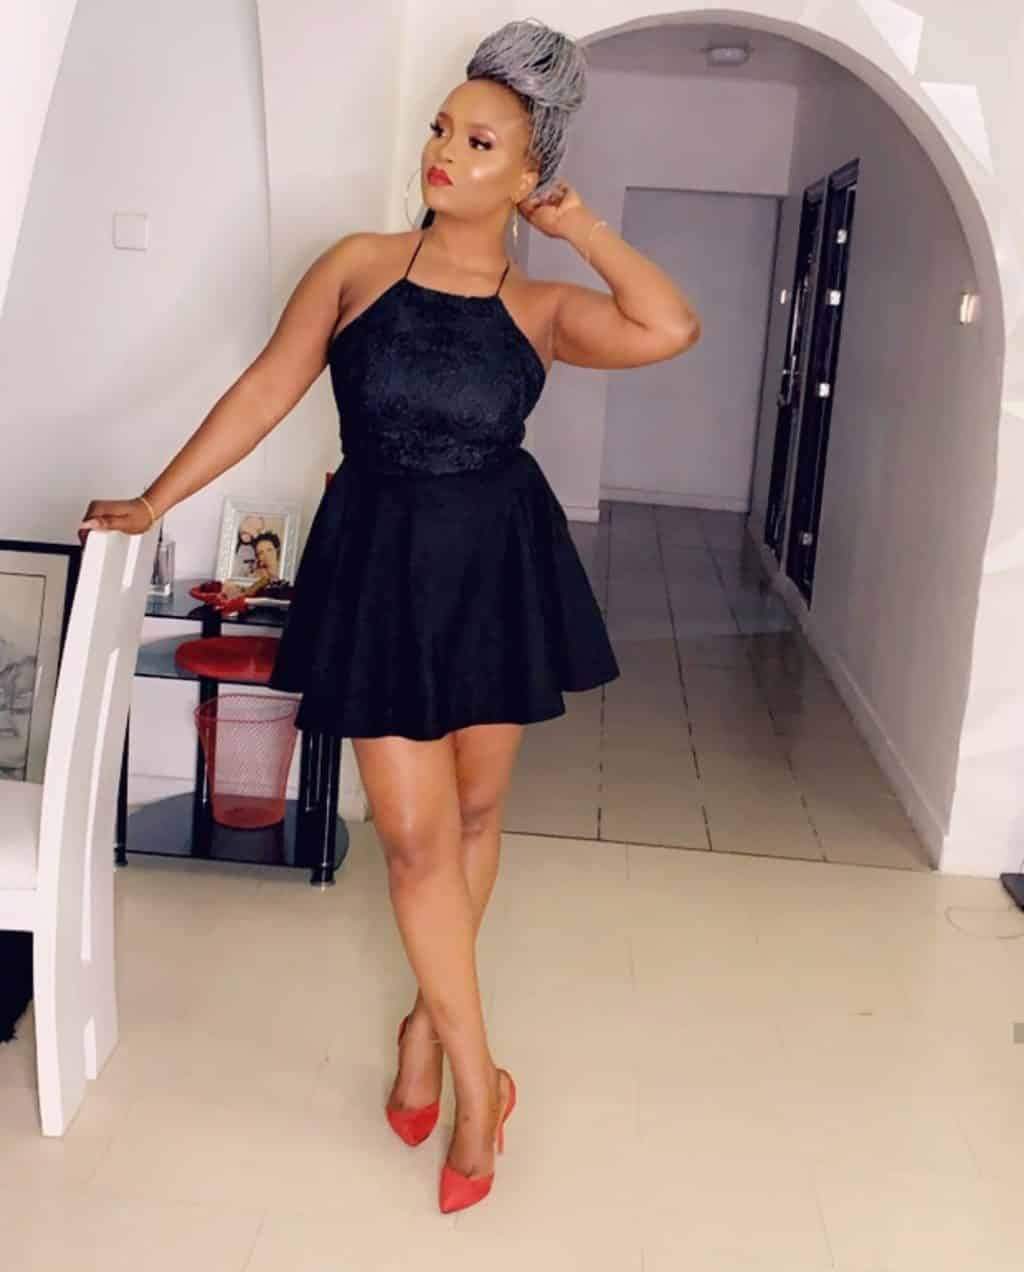 'The biggest lesson I learnt this year is not to force anything' - Blossom Chukwujekwu's estranged wife, Maureen writes